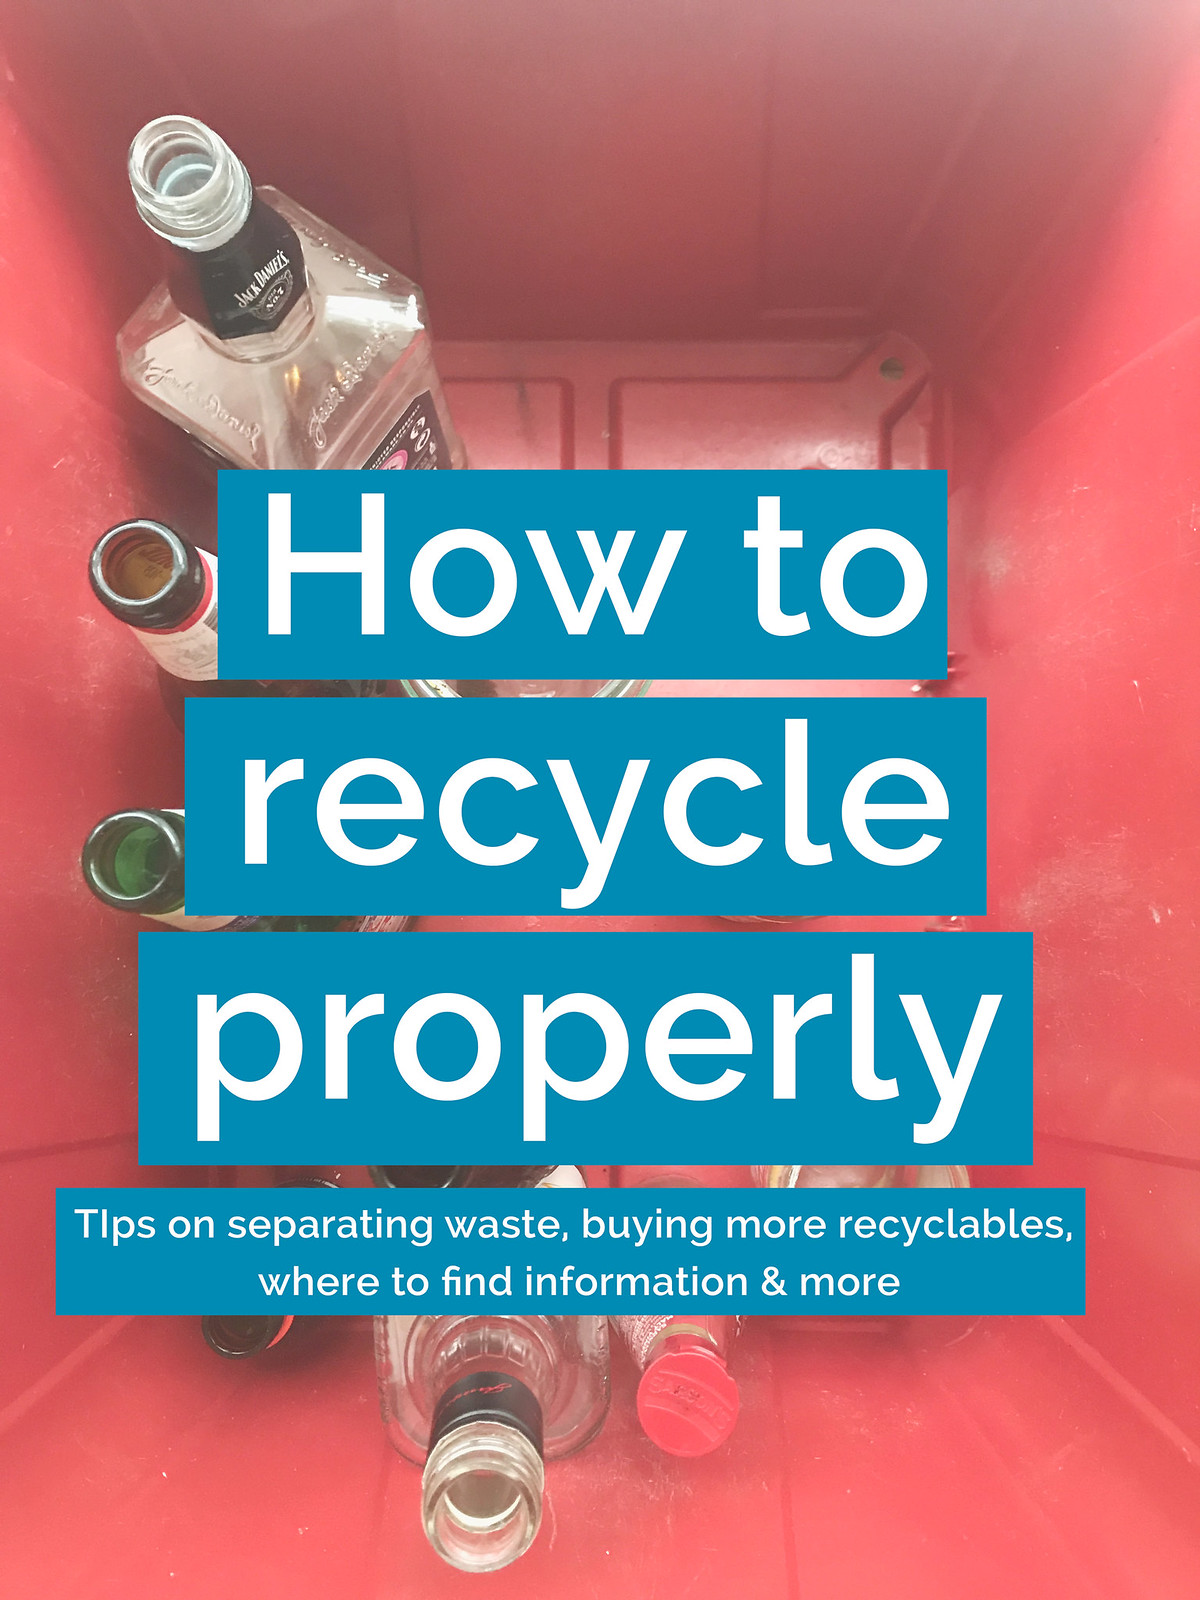 How to recycle properly